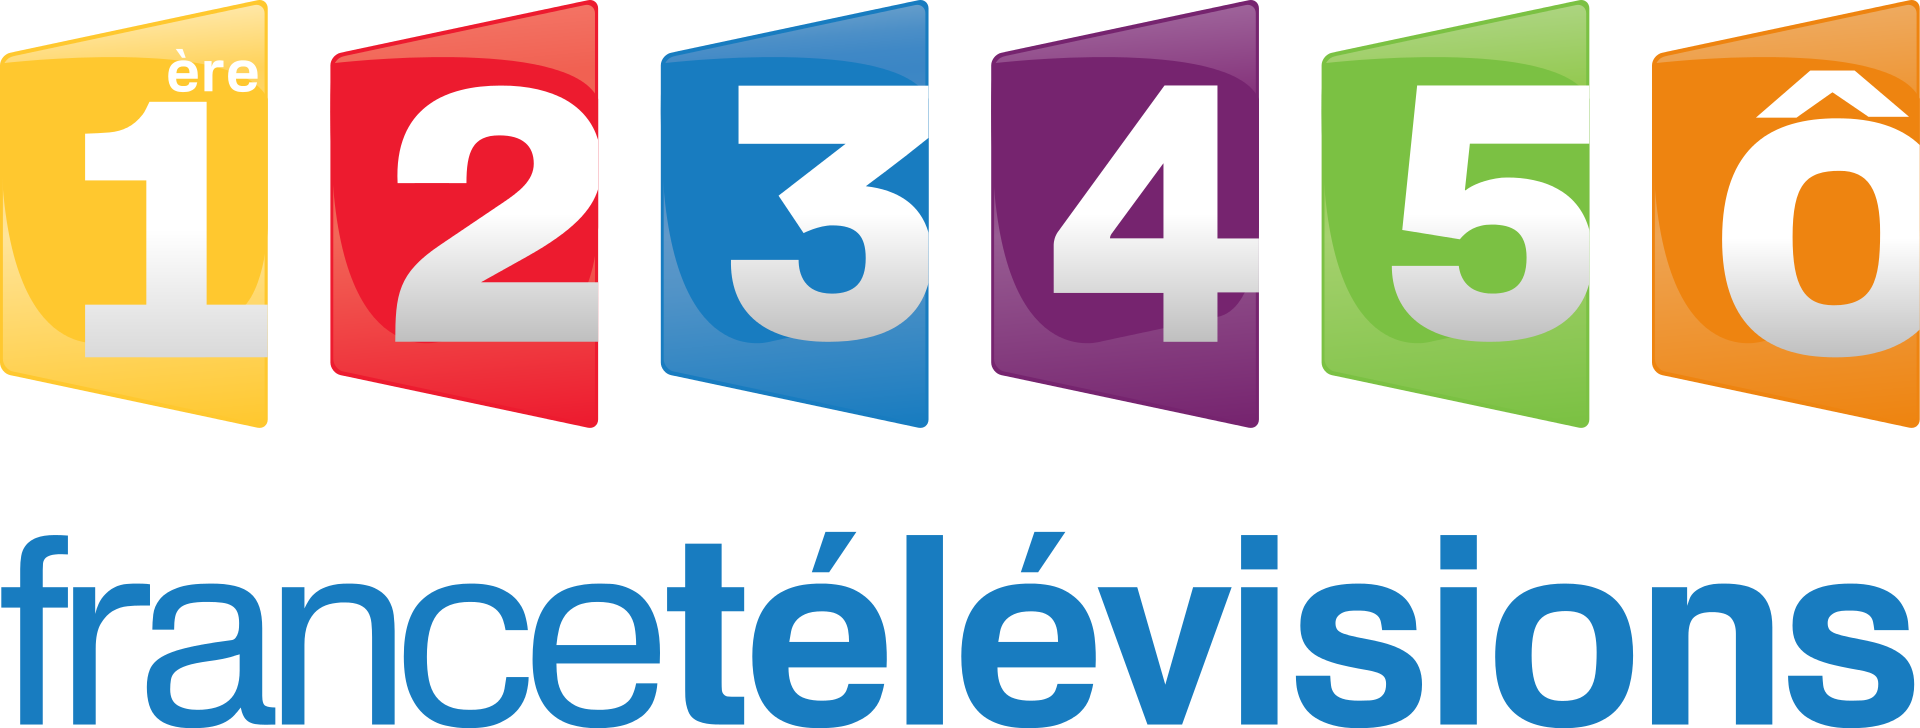 France Televisions Aims To Reflect National Diversity European Institute For Gender Equality